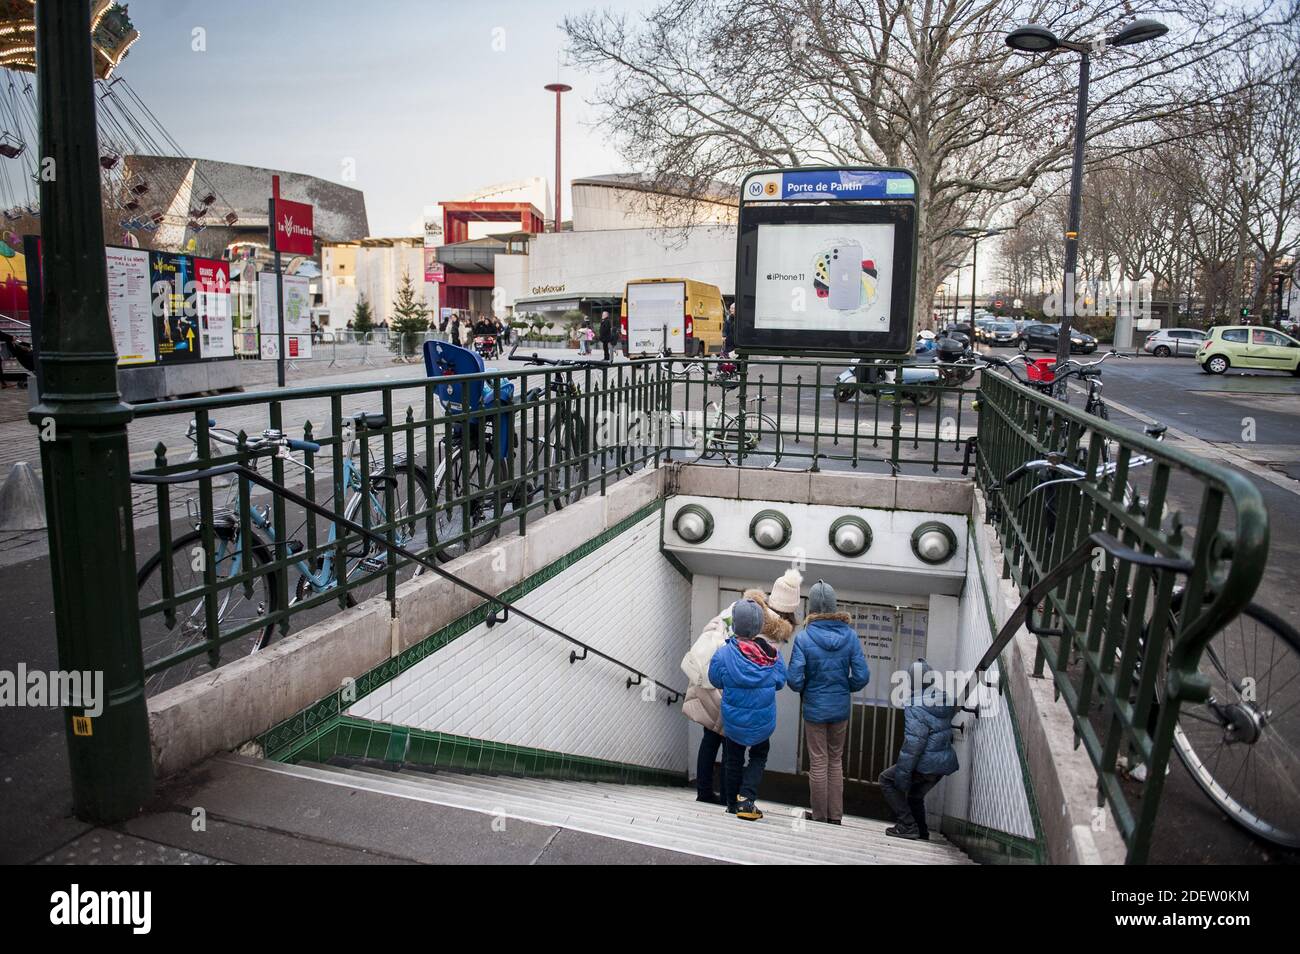 A closed metro station is seen at Porte de Pantin in Paris, France on  December 18, 2019, during an ongoing strike against the French government's  plan to overhaul the country's retirement system.